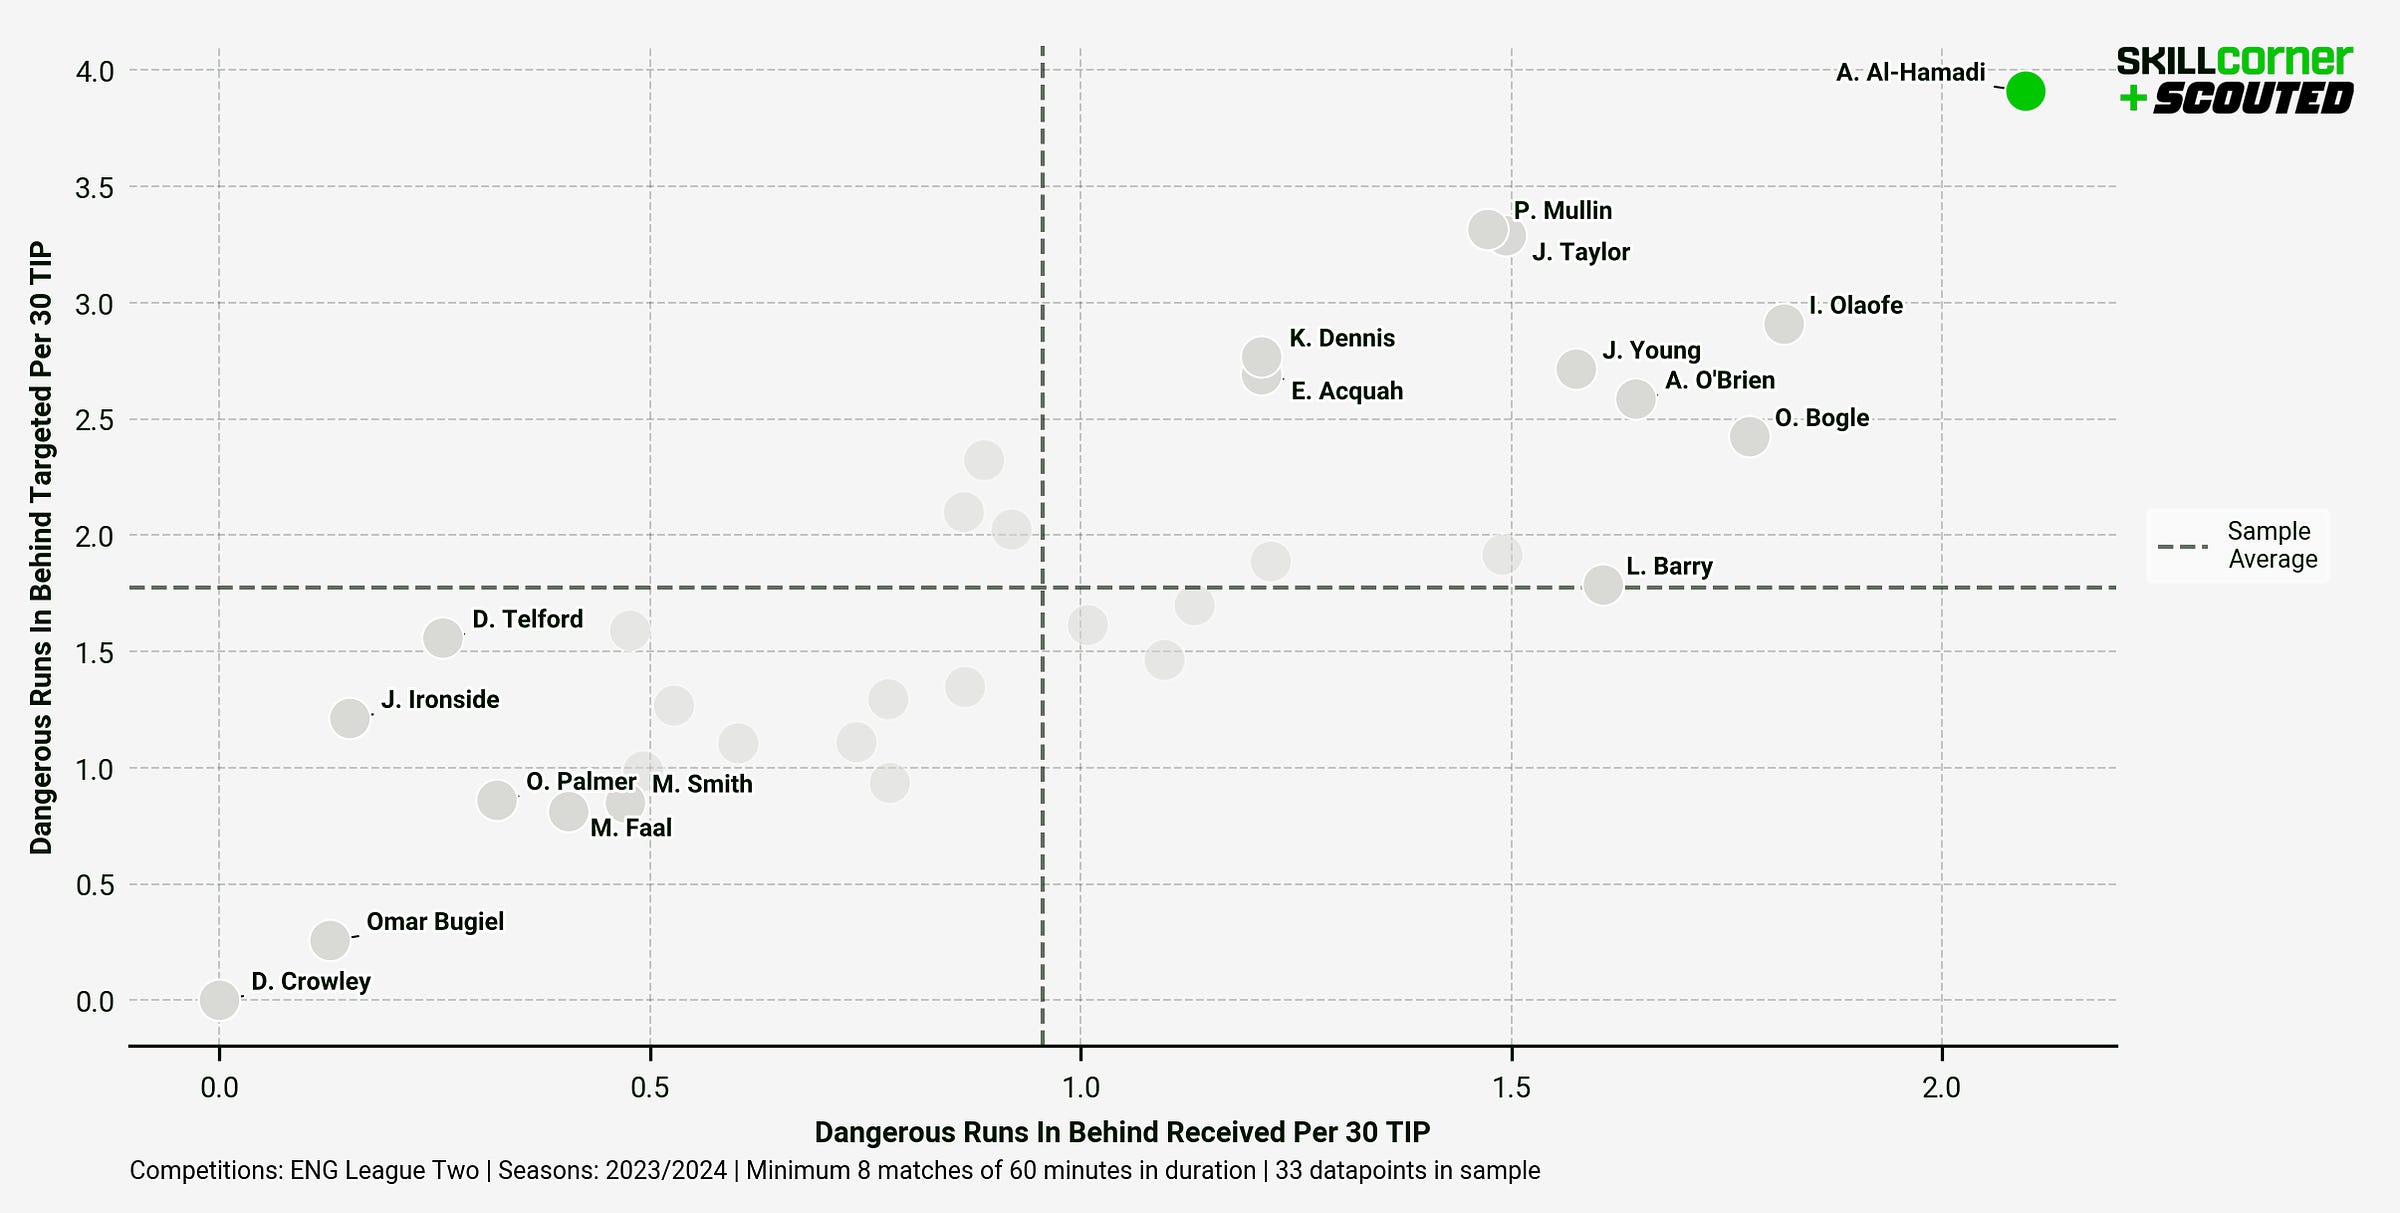 A SCOUTED x SkillCorner graph plotting Dangerous Runs In Behind Targeted per 30 TIP against Dangerus Runs In Behind Received per 30 TIP among all League Two forwards in the 2023/24 season.